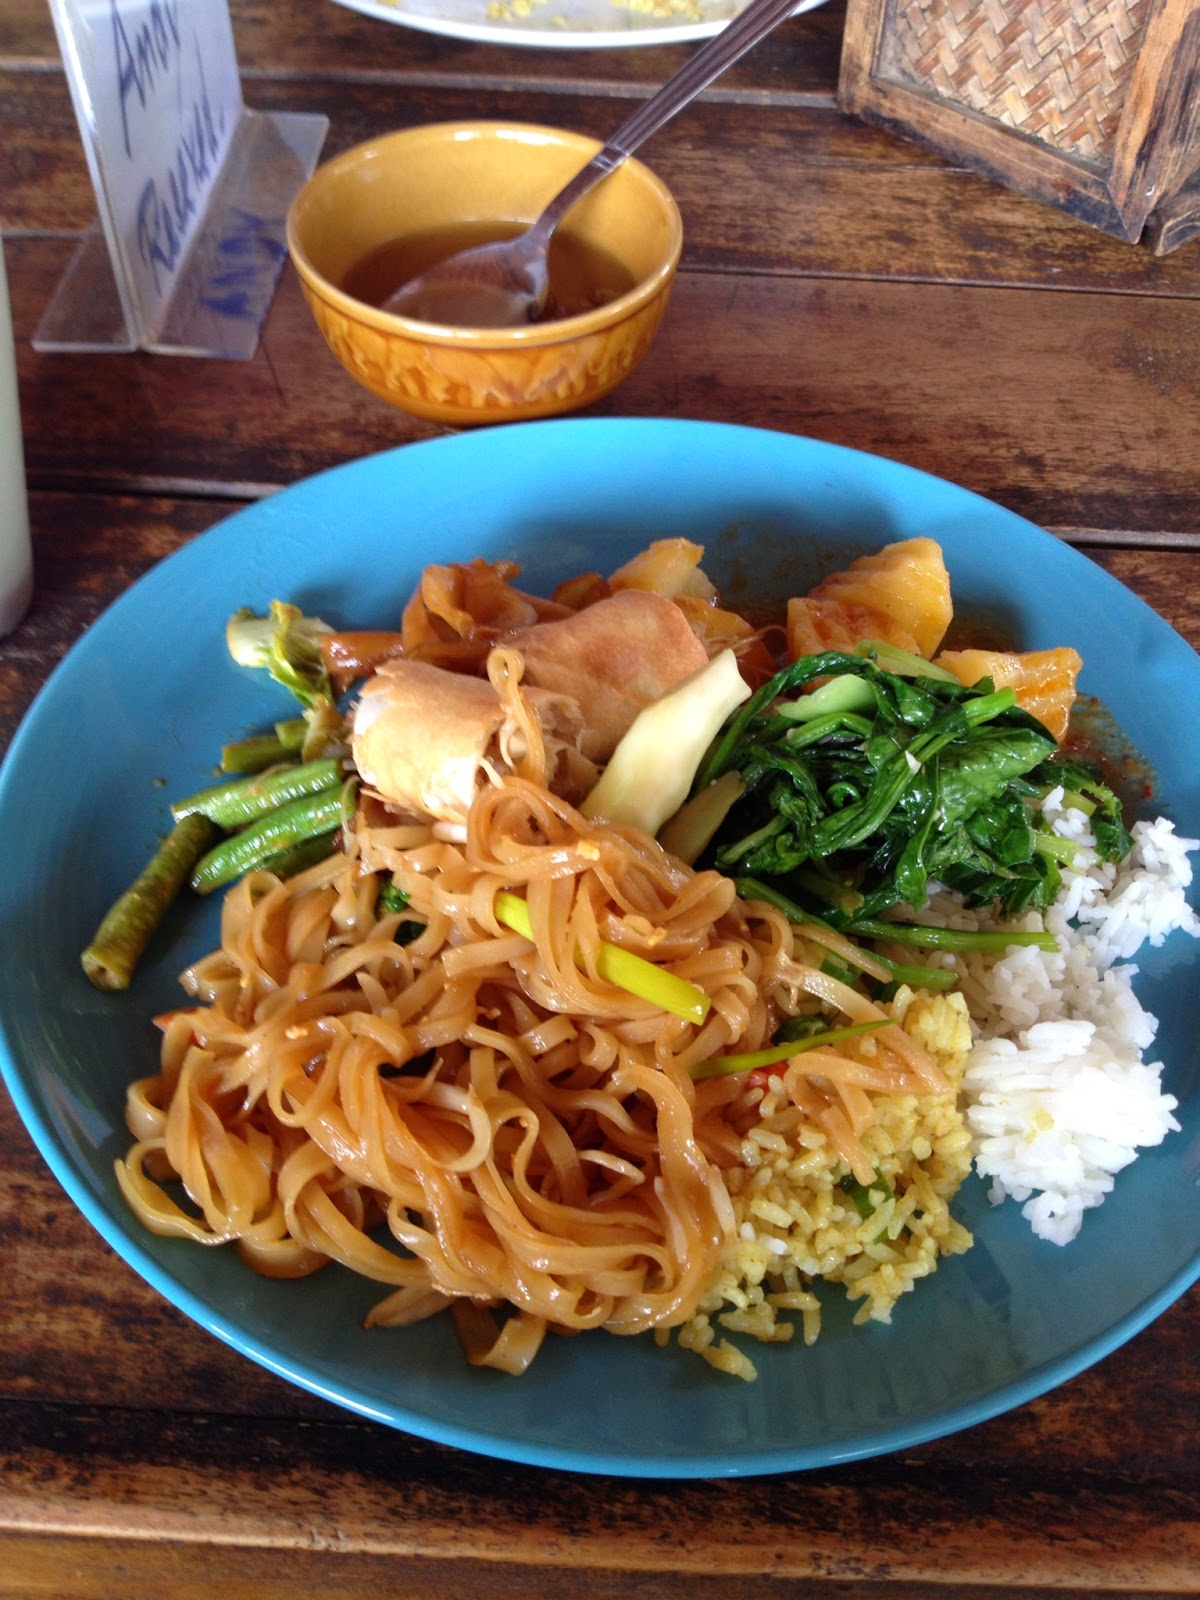 Chiang Mai - Lunch at Elephant Nature Park